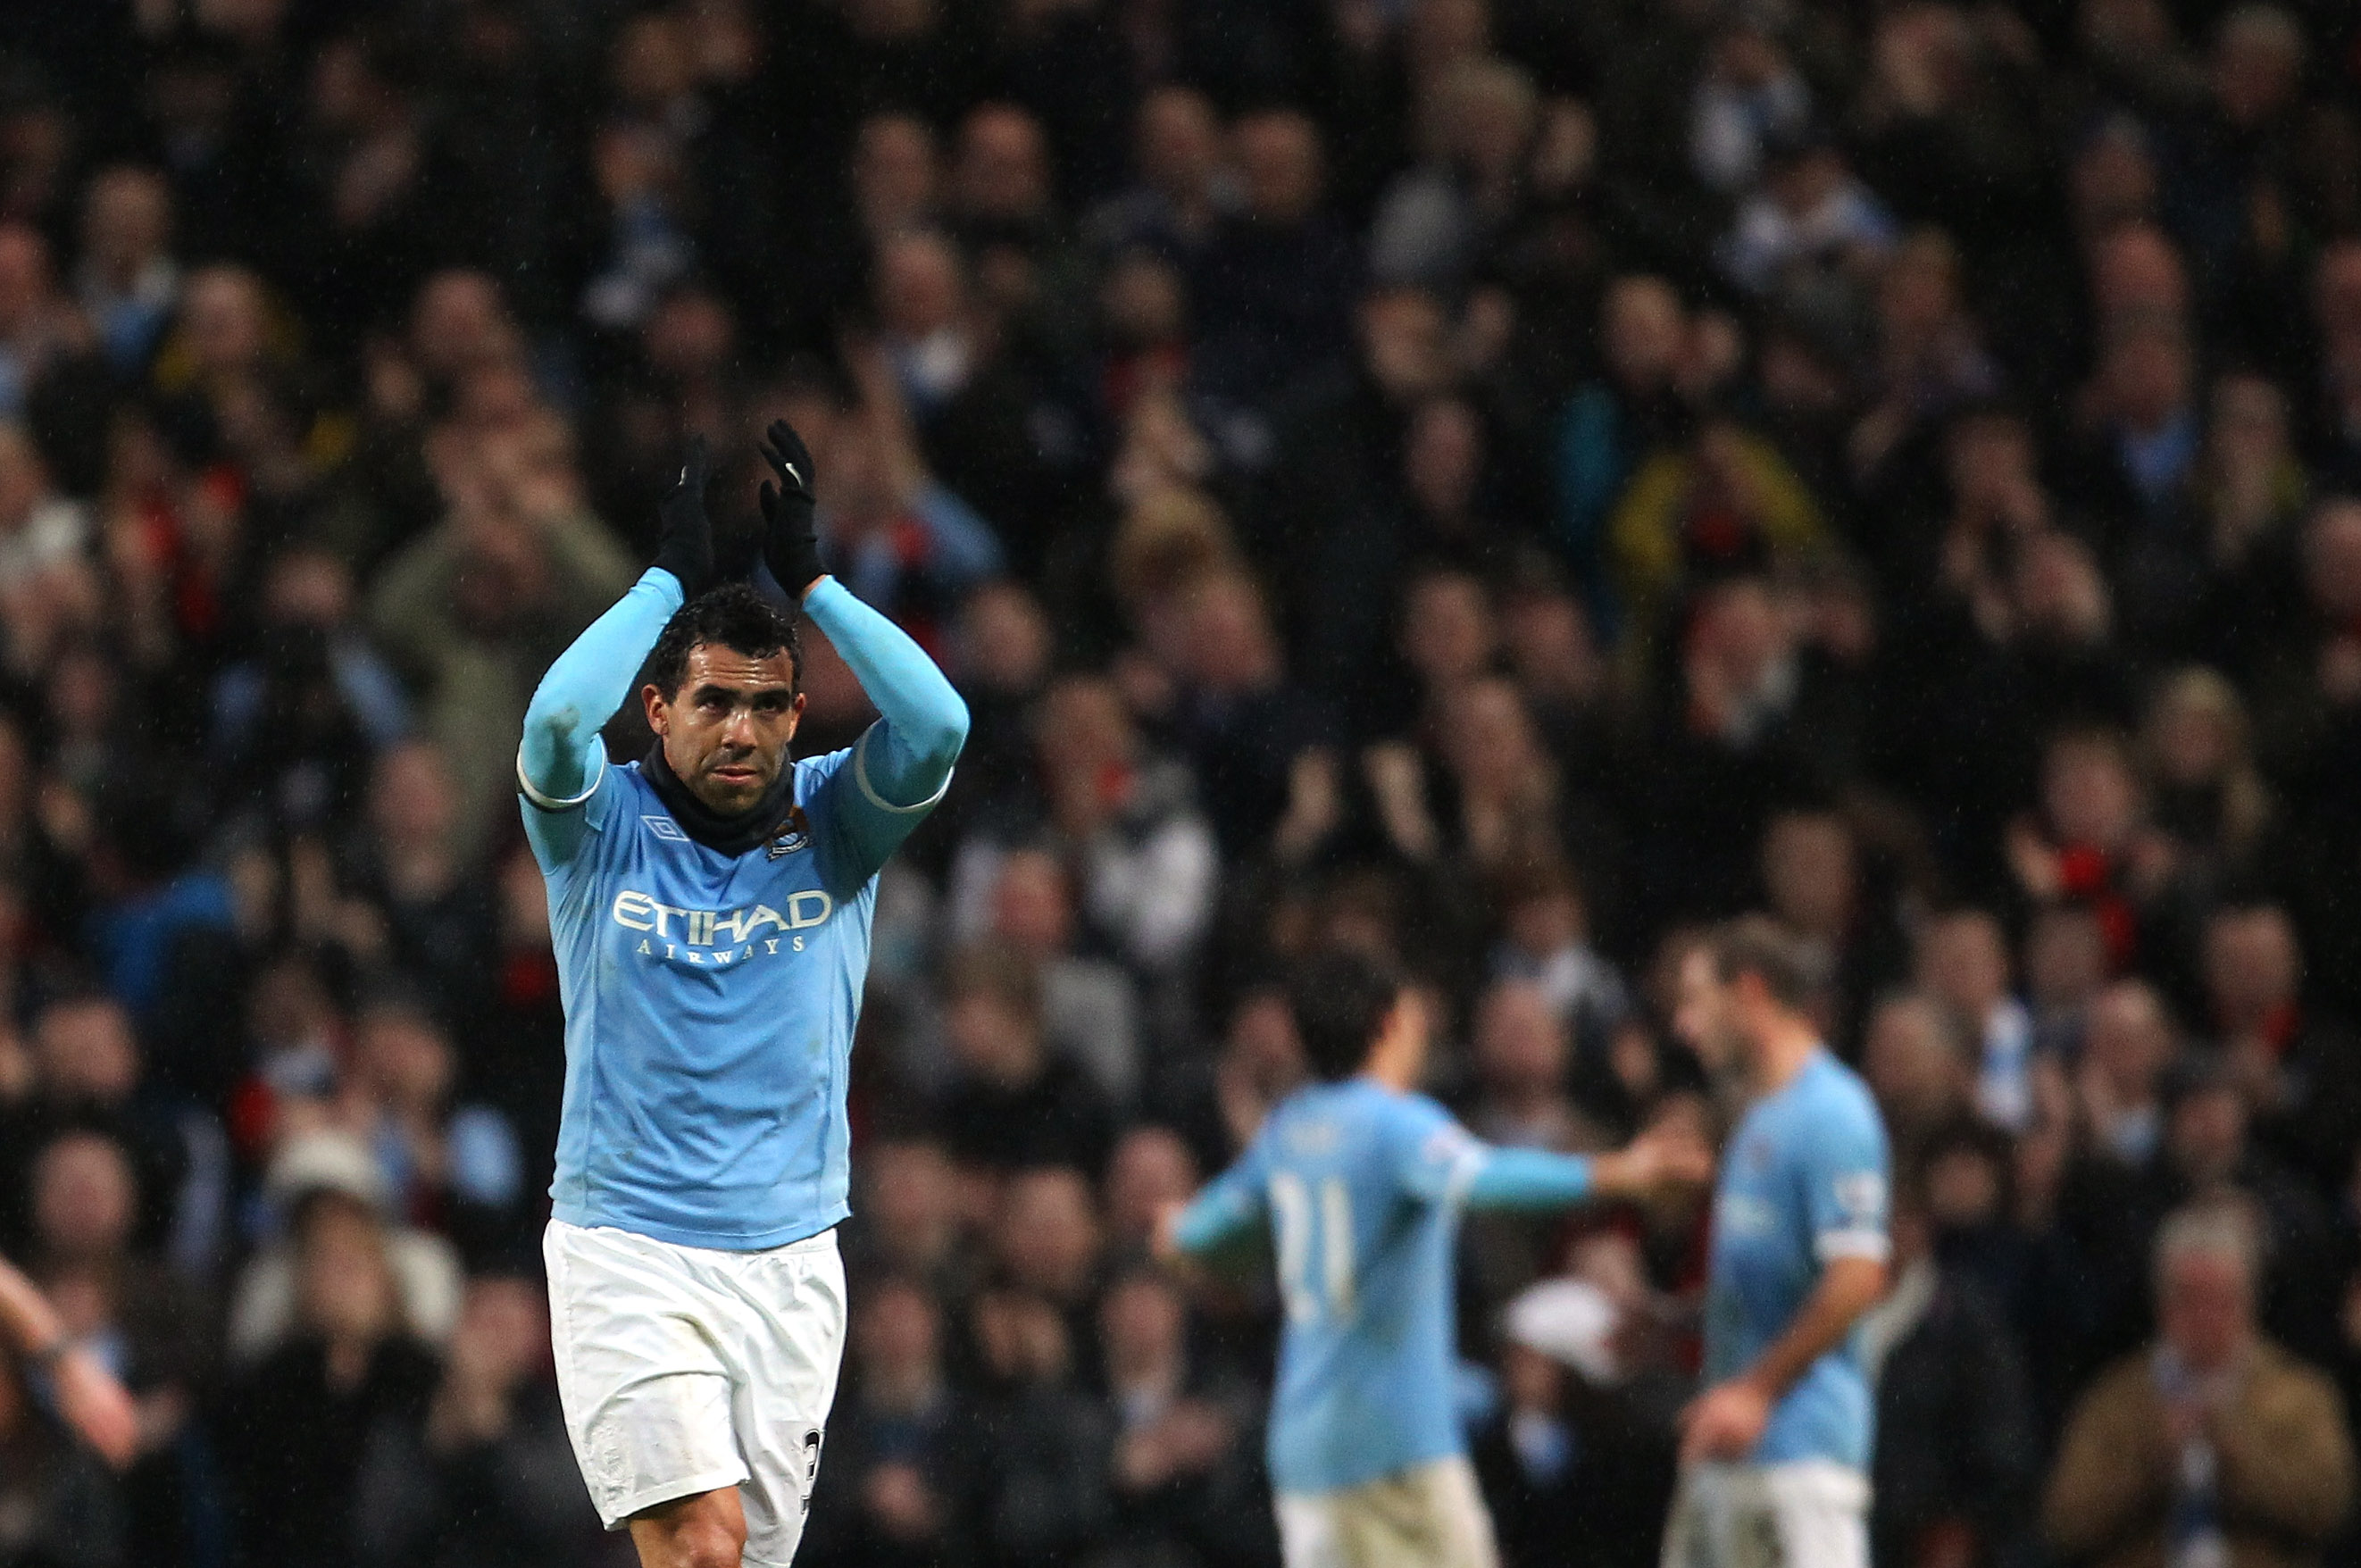 MANCHESTER, ENGLAND - FEBRUARY 05:  Carlos Tevez of Manchester City applauds his supporters after being substituted during the Barclays Premier League match between Manchester City and West Bromwich Albion at the City of Manchester Stadium on February 5,